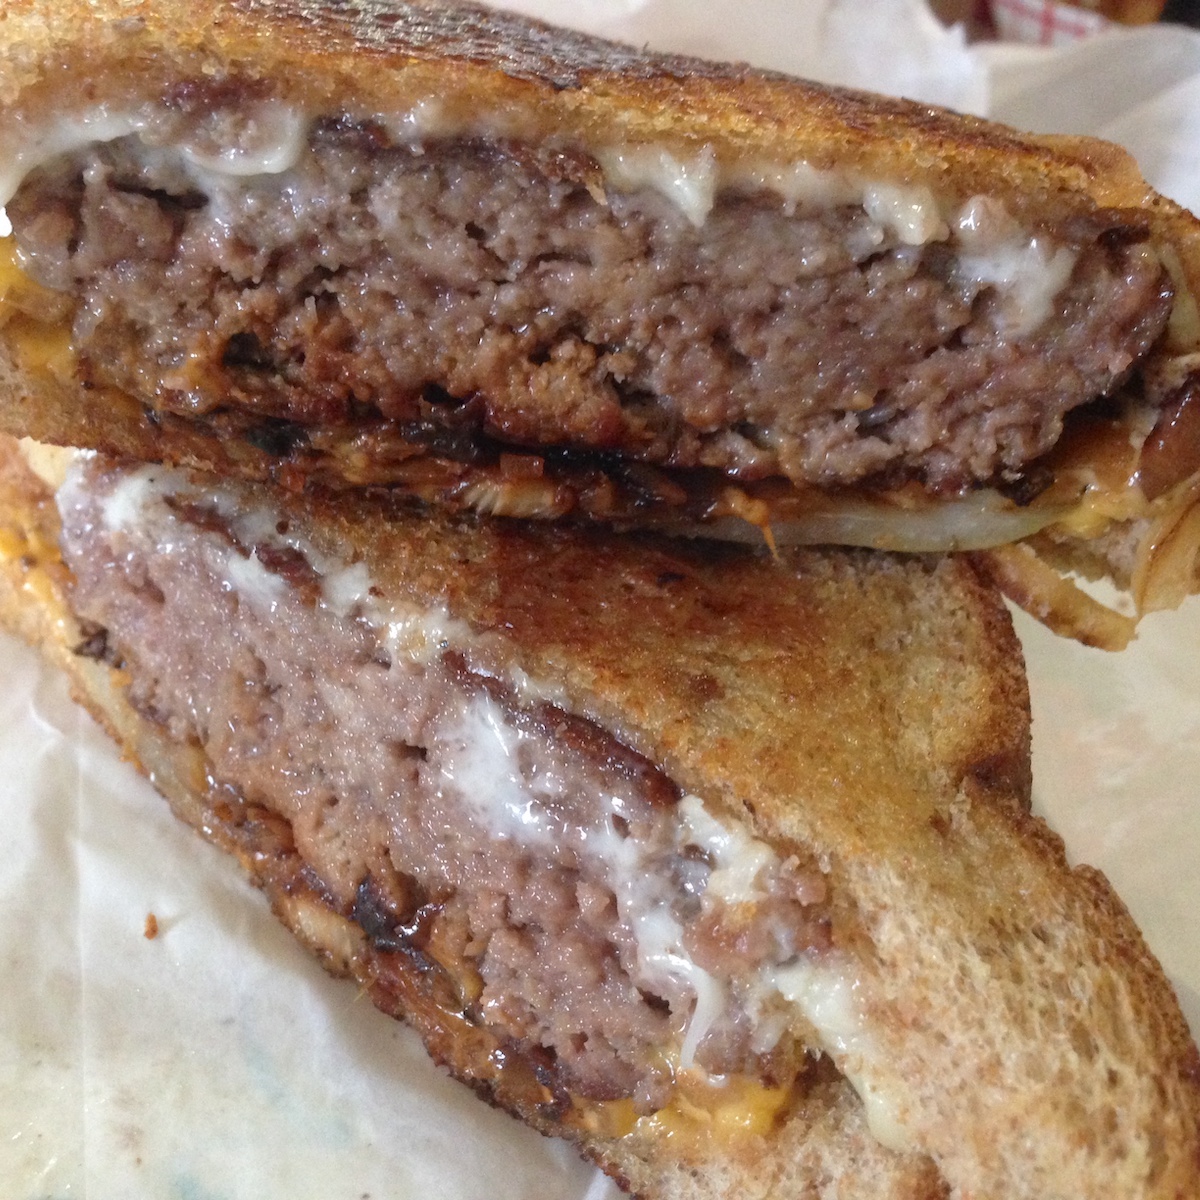 Patty Melt Halves from Phillips Grocery in Holly Springs, Mississippi